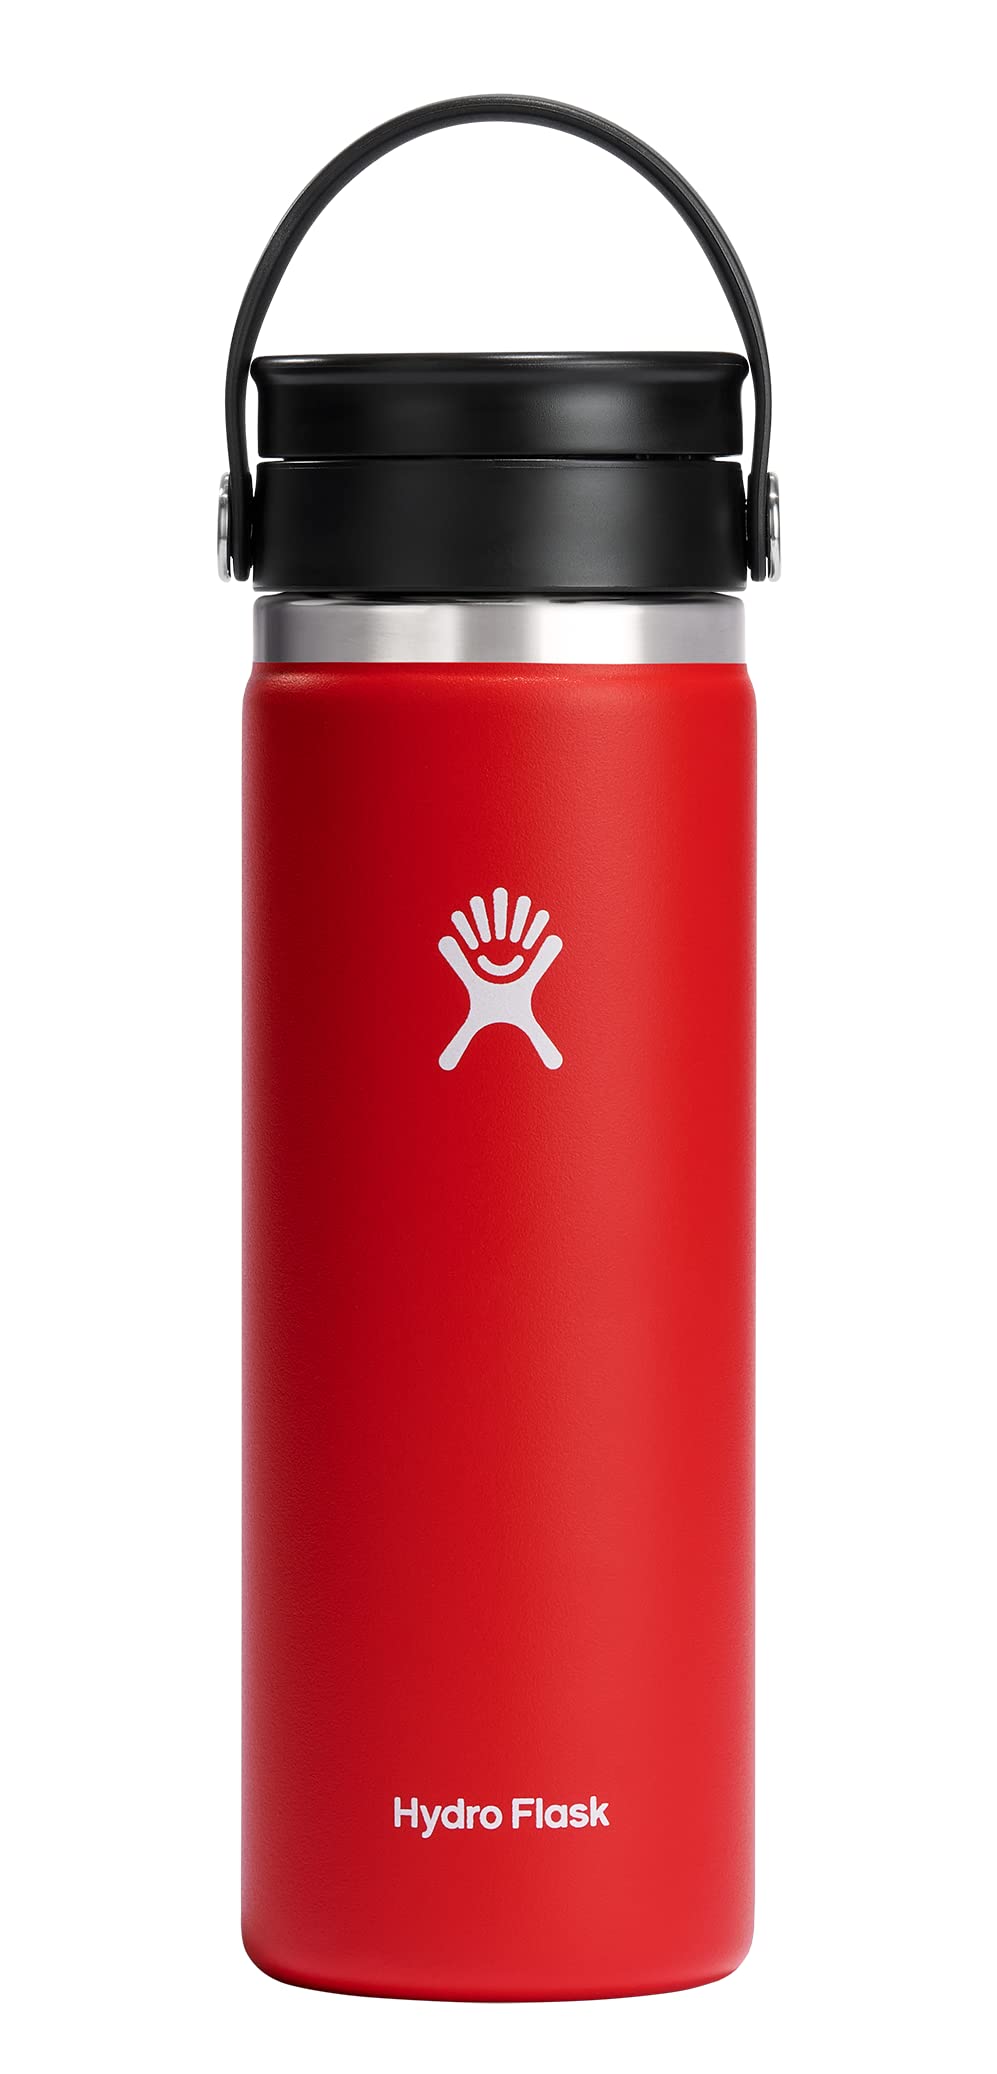 Hydro Flask Wide Mouth with Flex Cap, 20 oz